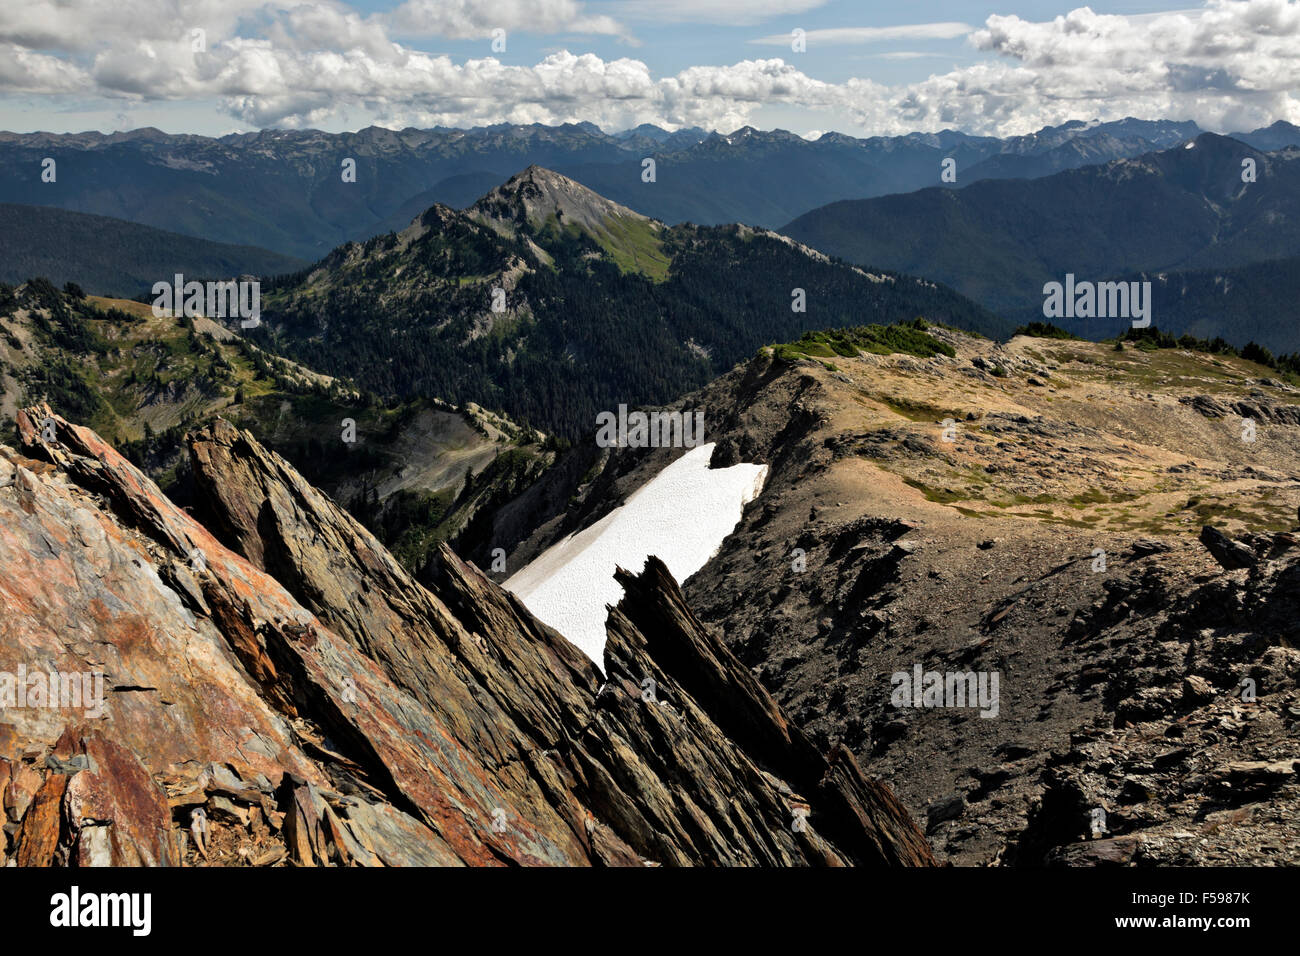 WA10761-00...WASHINGTON - Mount Scott viewed from Mount Ferry in the Bailey Range of Olympic National Park. Stock Photo